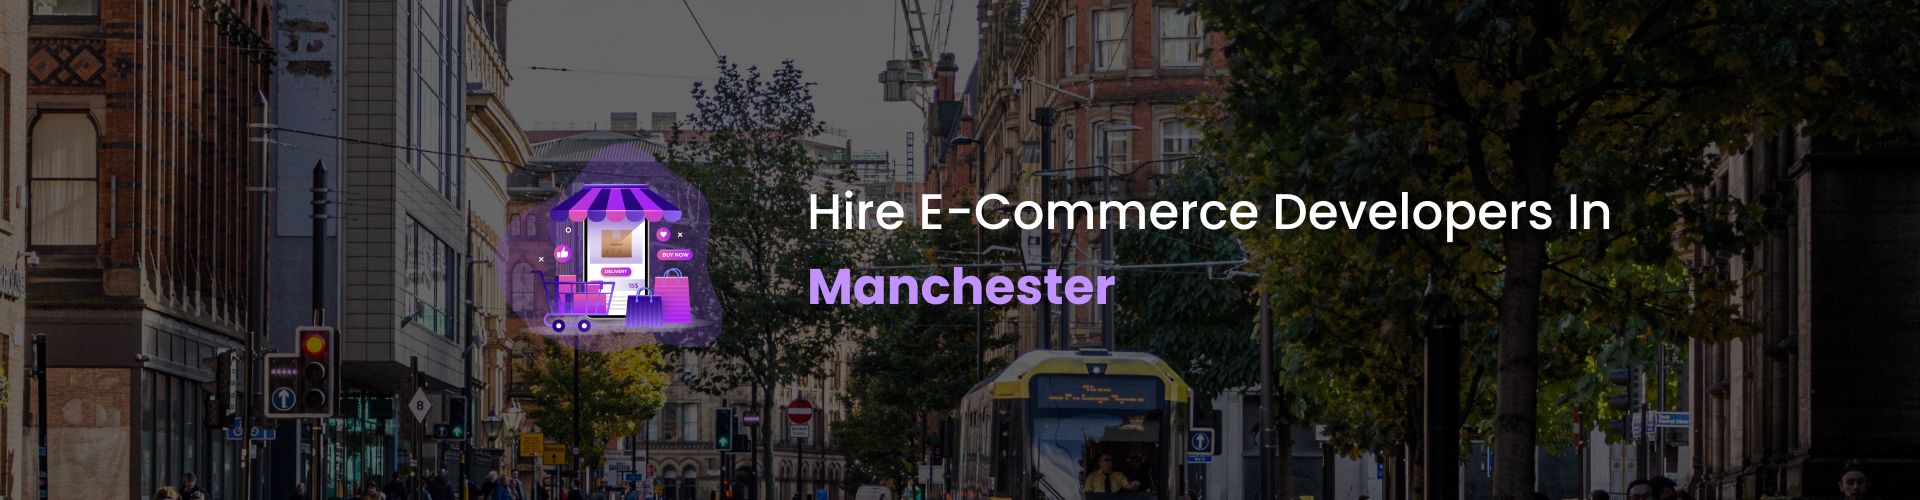 hire ecommerce developers in manchester